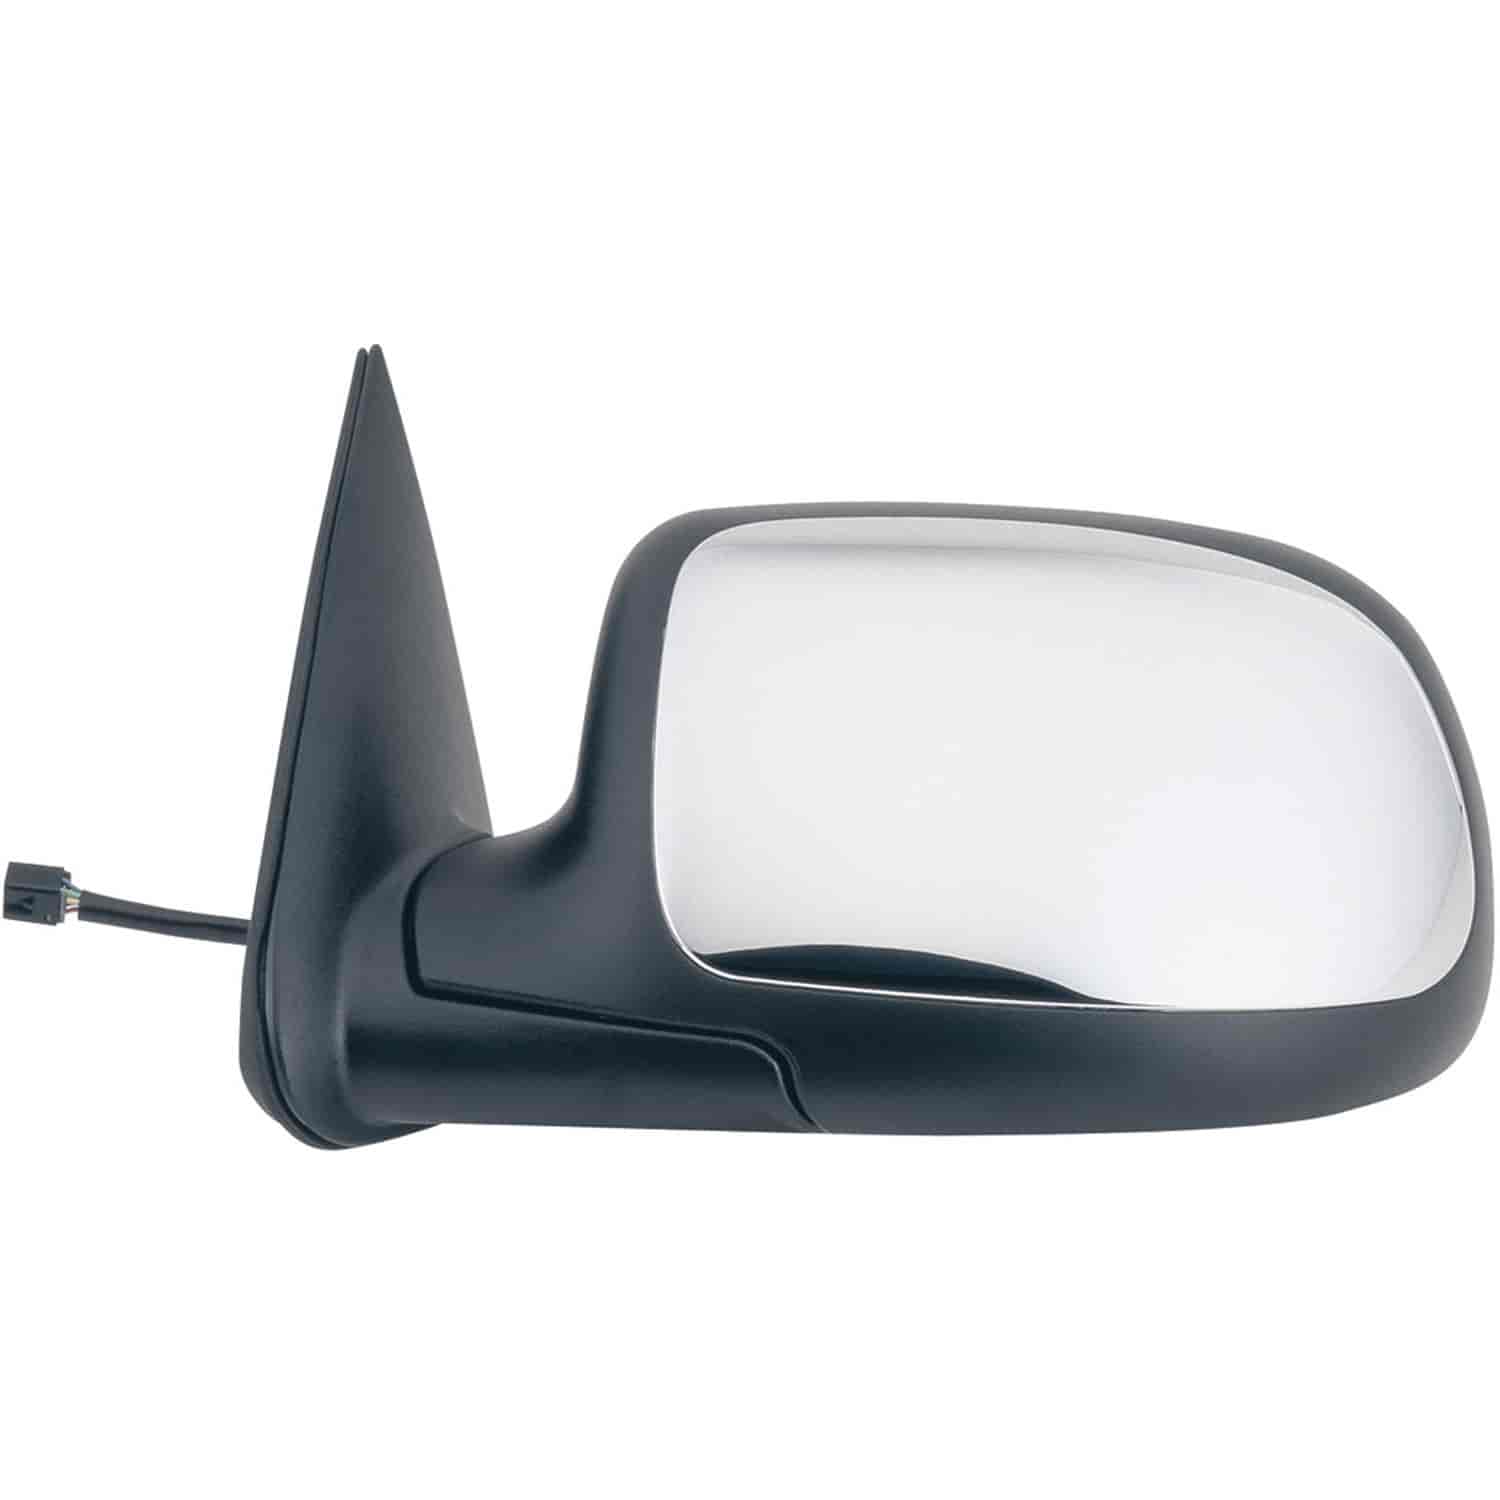 OEM Style Replacement mirror for 99-02 Chevy Silverado Full Size Pick-Up GMC Sierra Full Size Pick-U